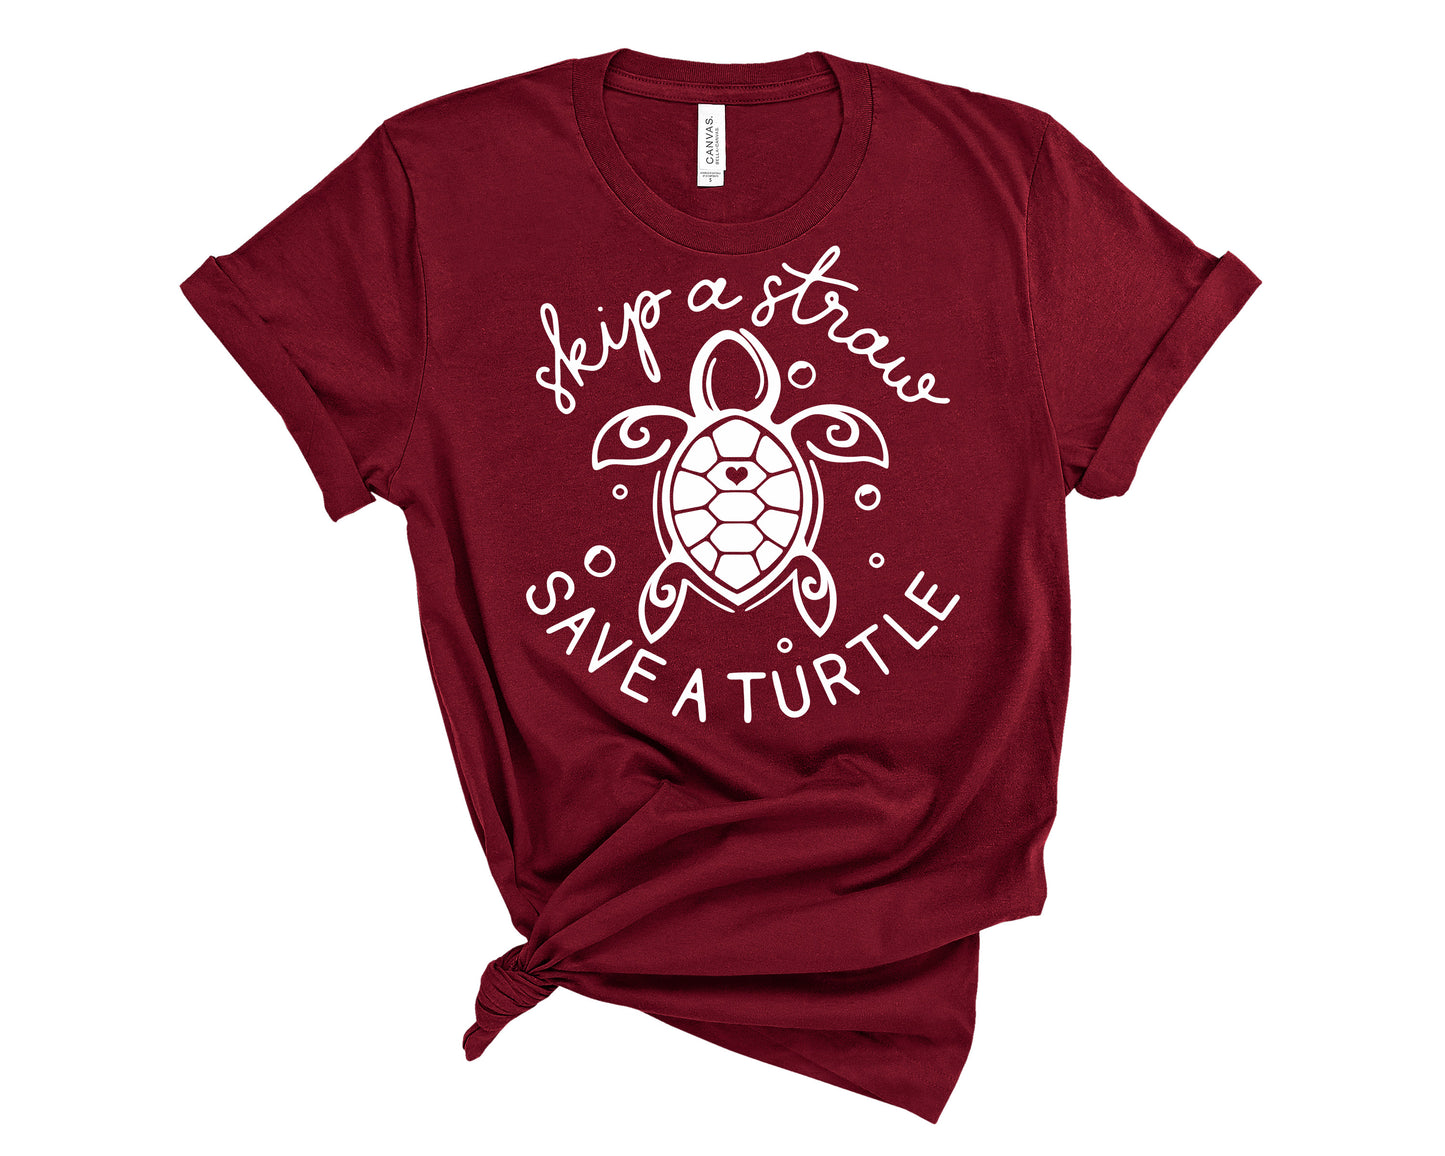 Save a Turtle T-shirt